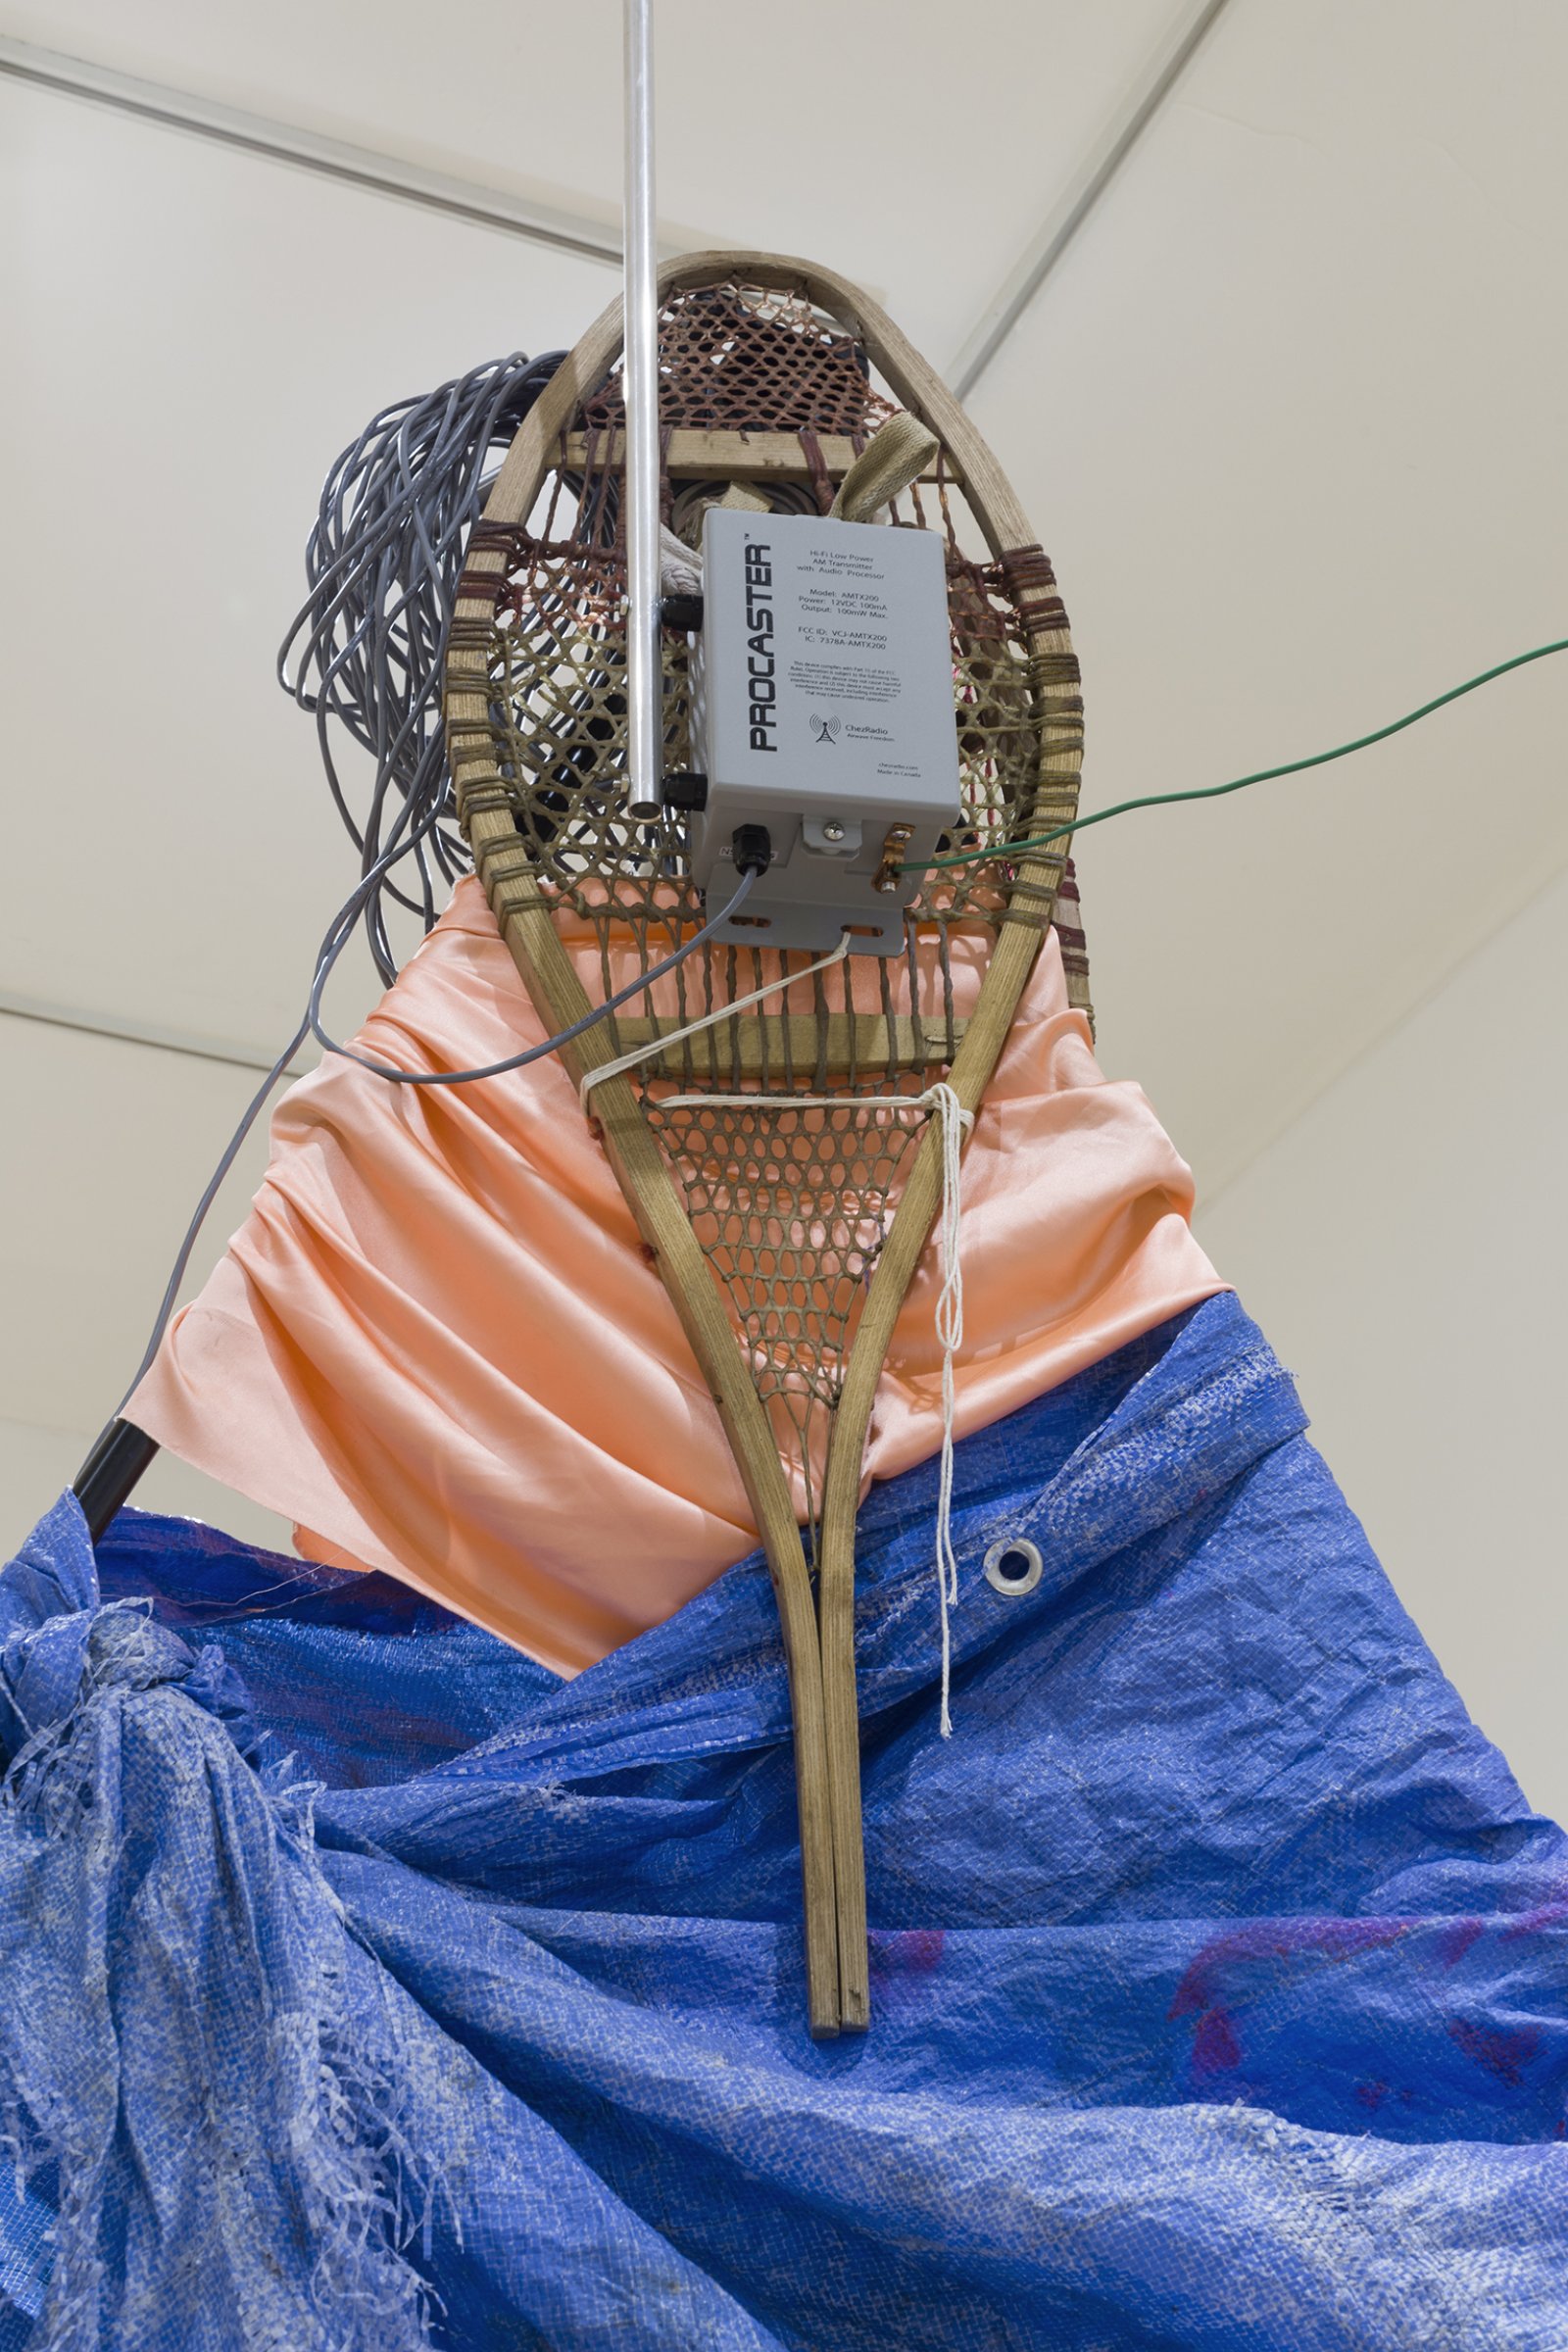 Duane Linklater, apparatus for the dissemination of Indigenous ideas and sounds into the air (detail), 2017, tripod, radio transmitter, hand-dyed snowshoes, tarpaulin, fabric, string, stone, tape, speaker, paint, wiring, dimensions variable. Installation view, apparatus for the circulation of Indigenous ideas and sounds into the air, Western Front, Vancouver, 2017